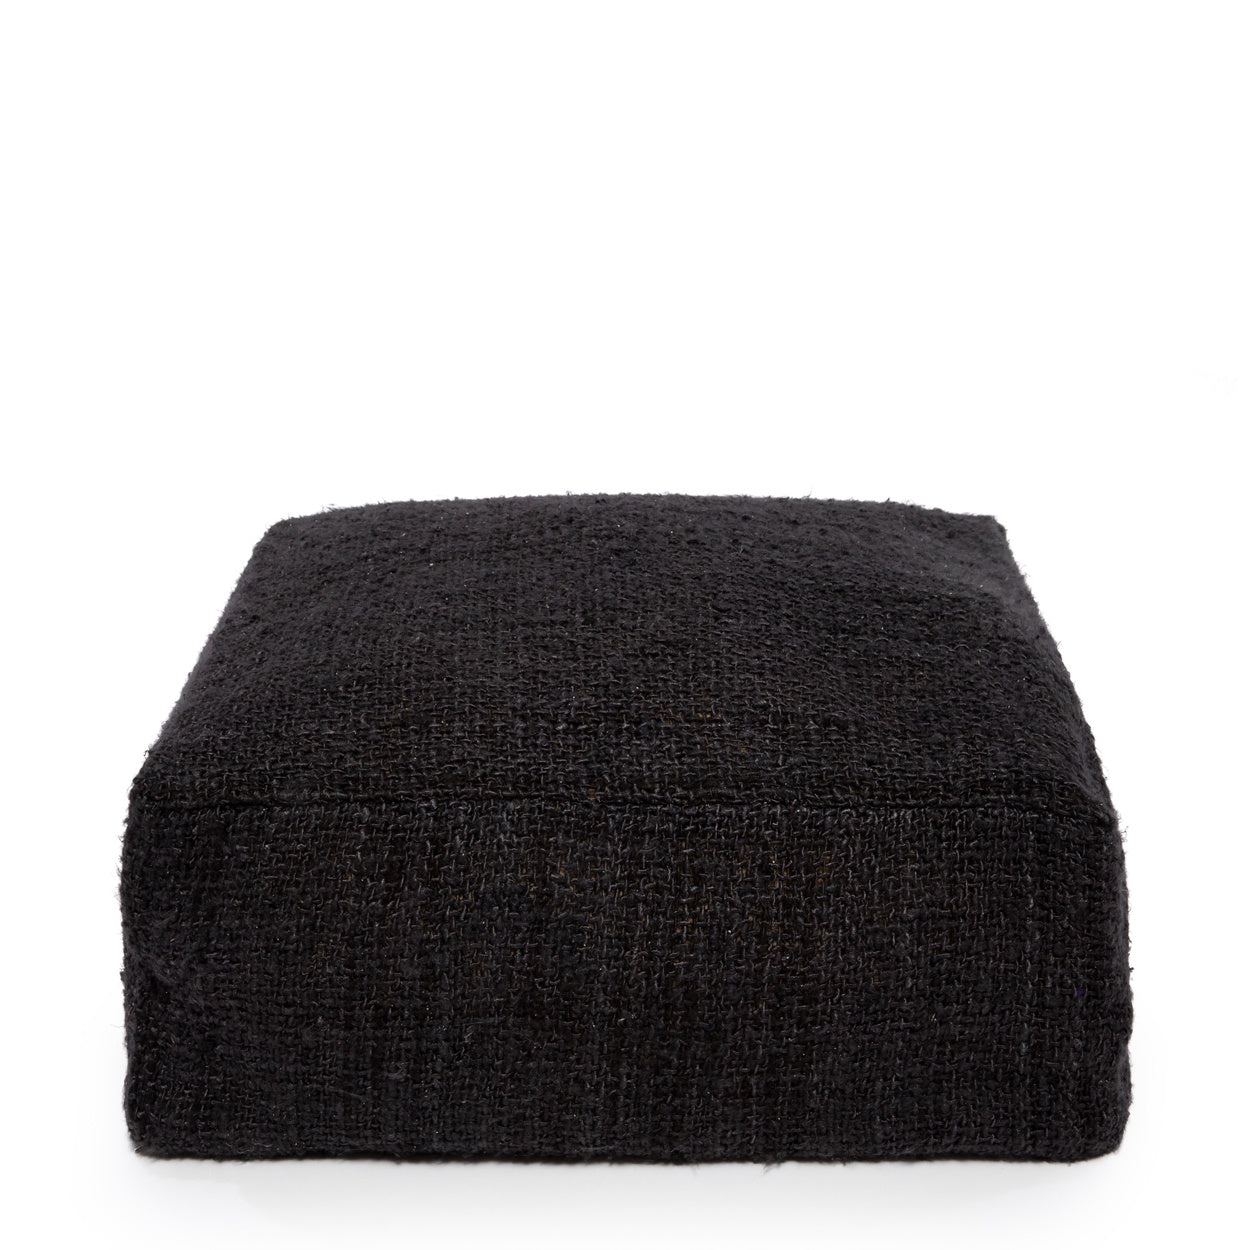 THE OH MY GEE Pouffe black